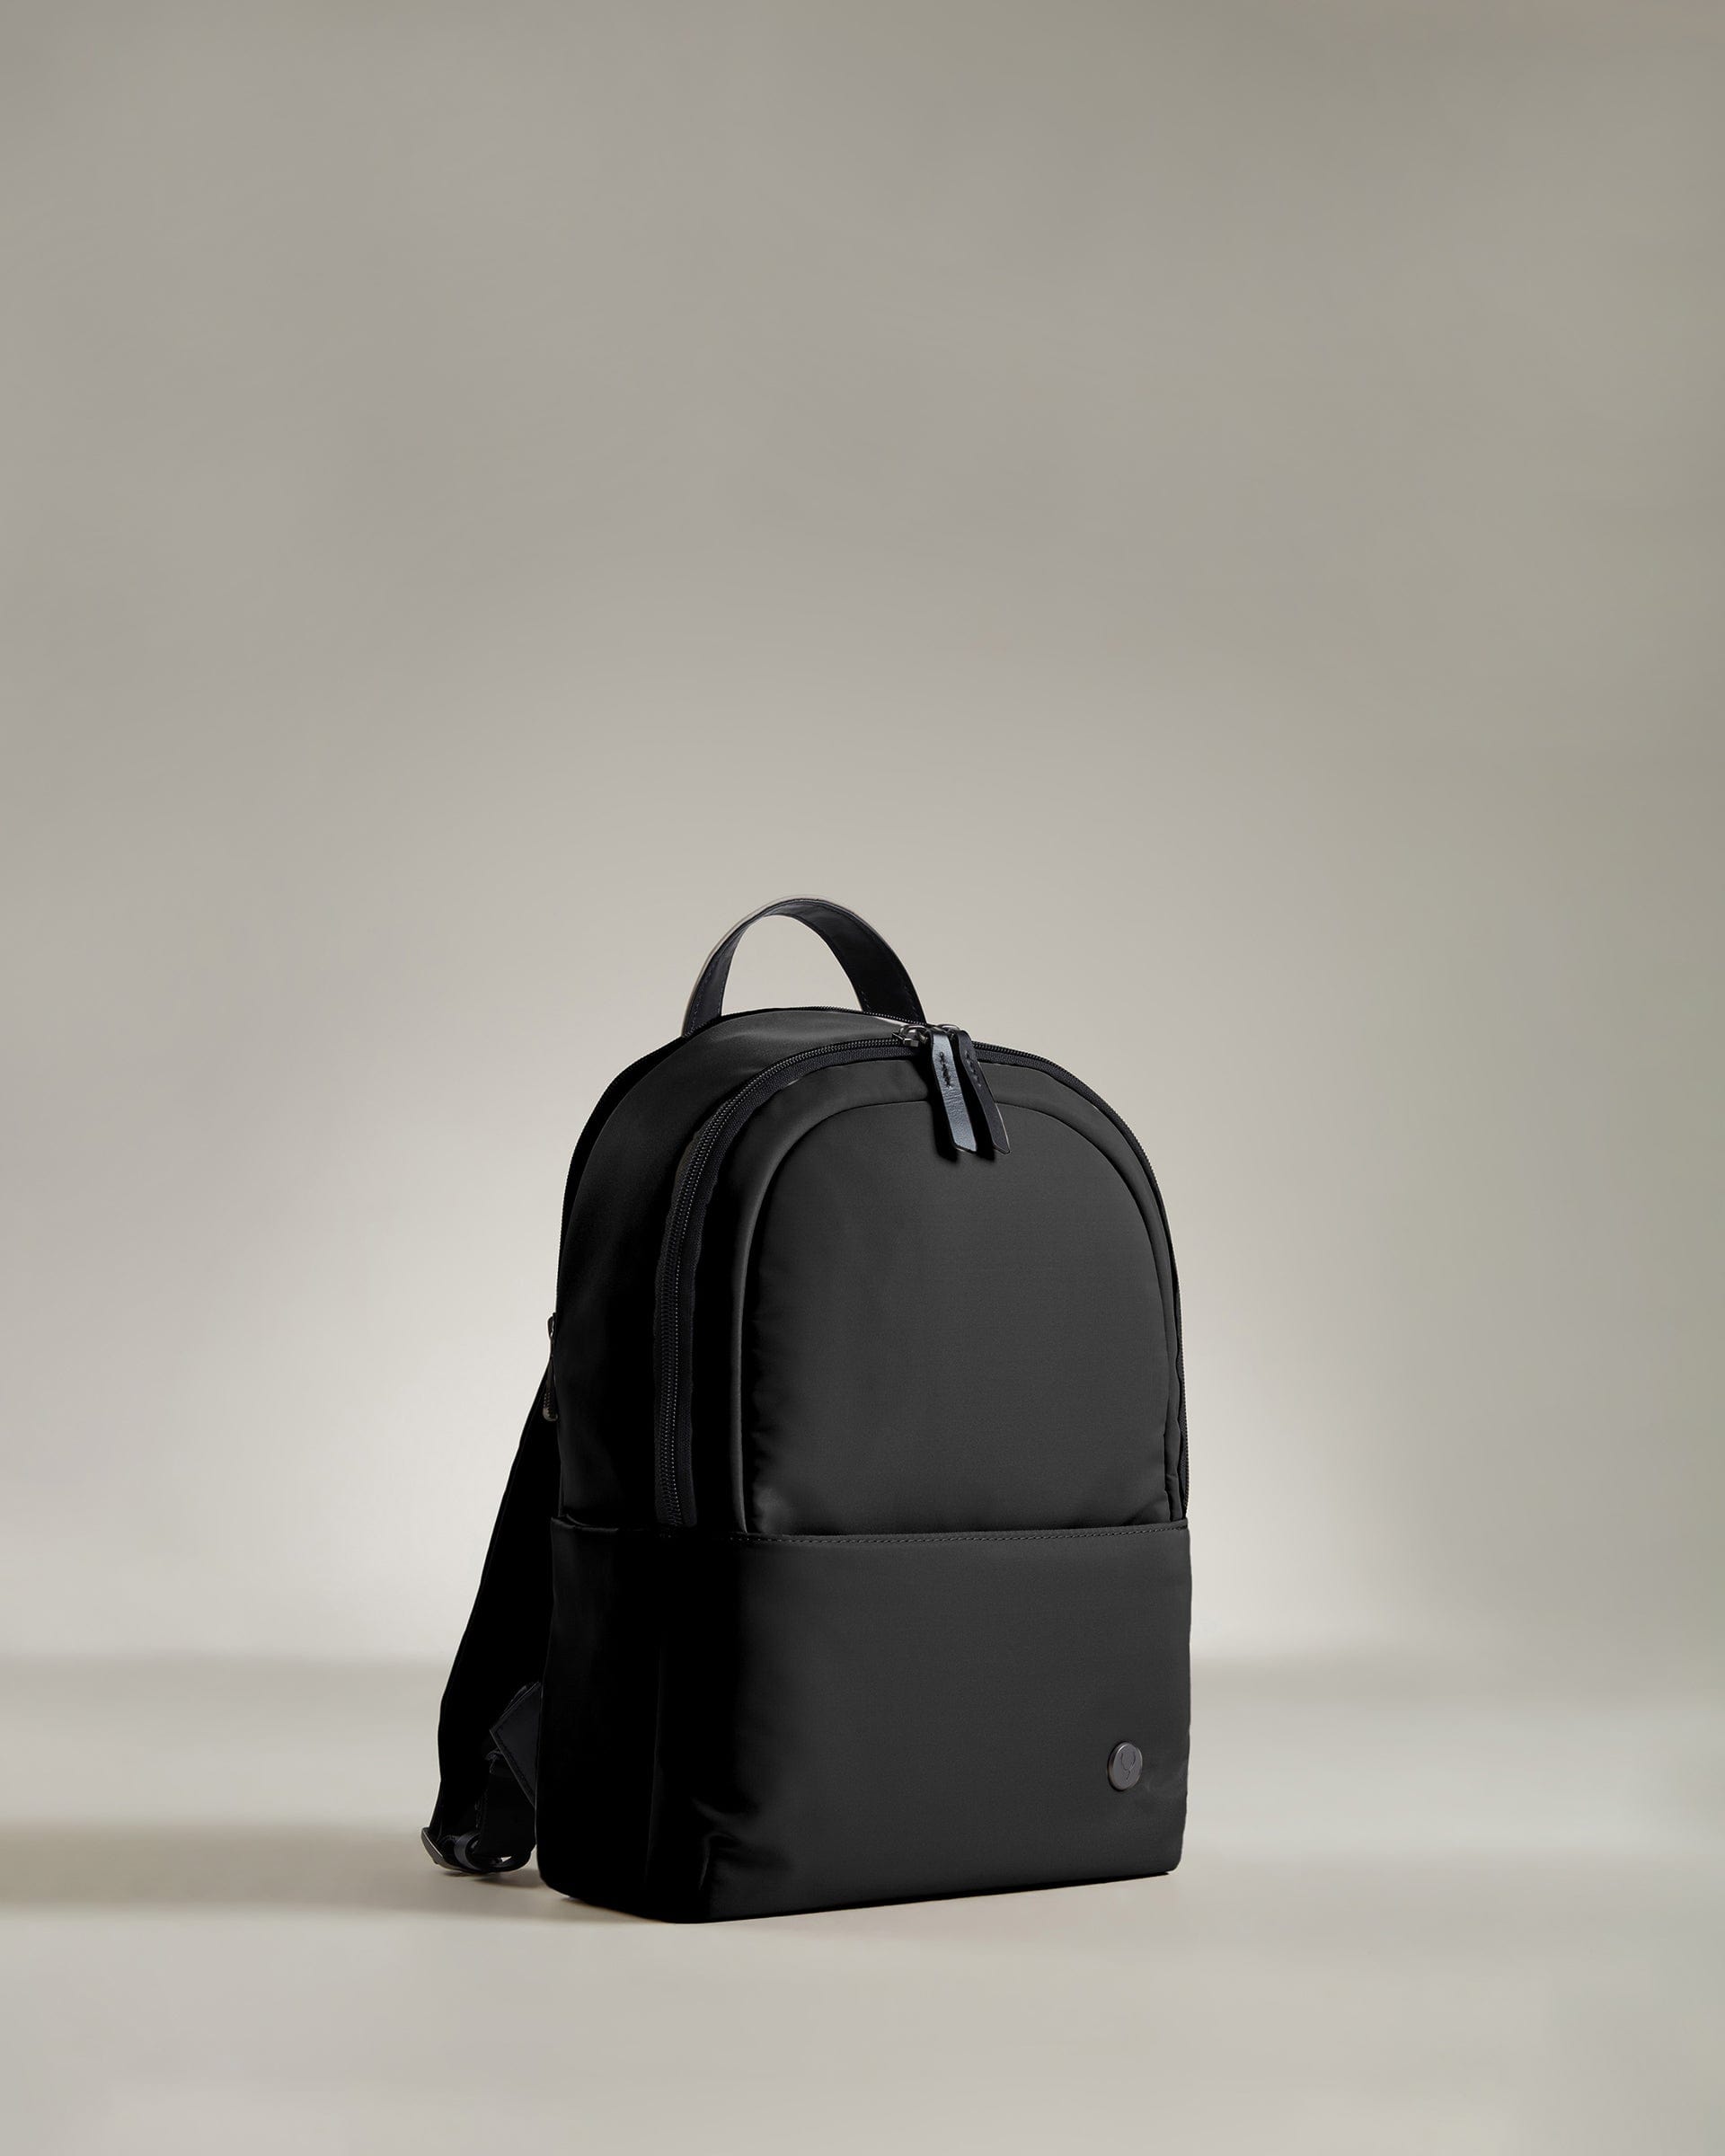 View Antler Chelsea Daypack In Black Size 37 x 26 x 12 cm information